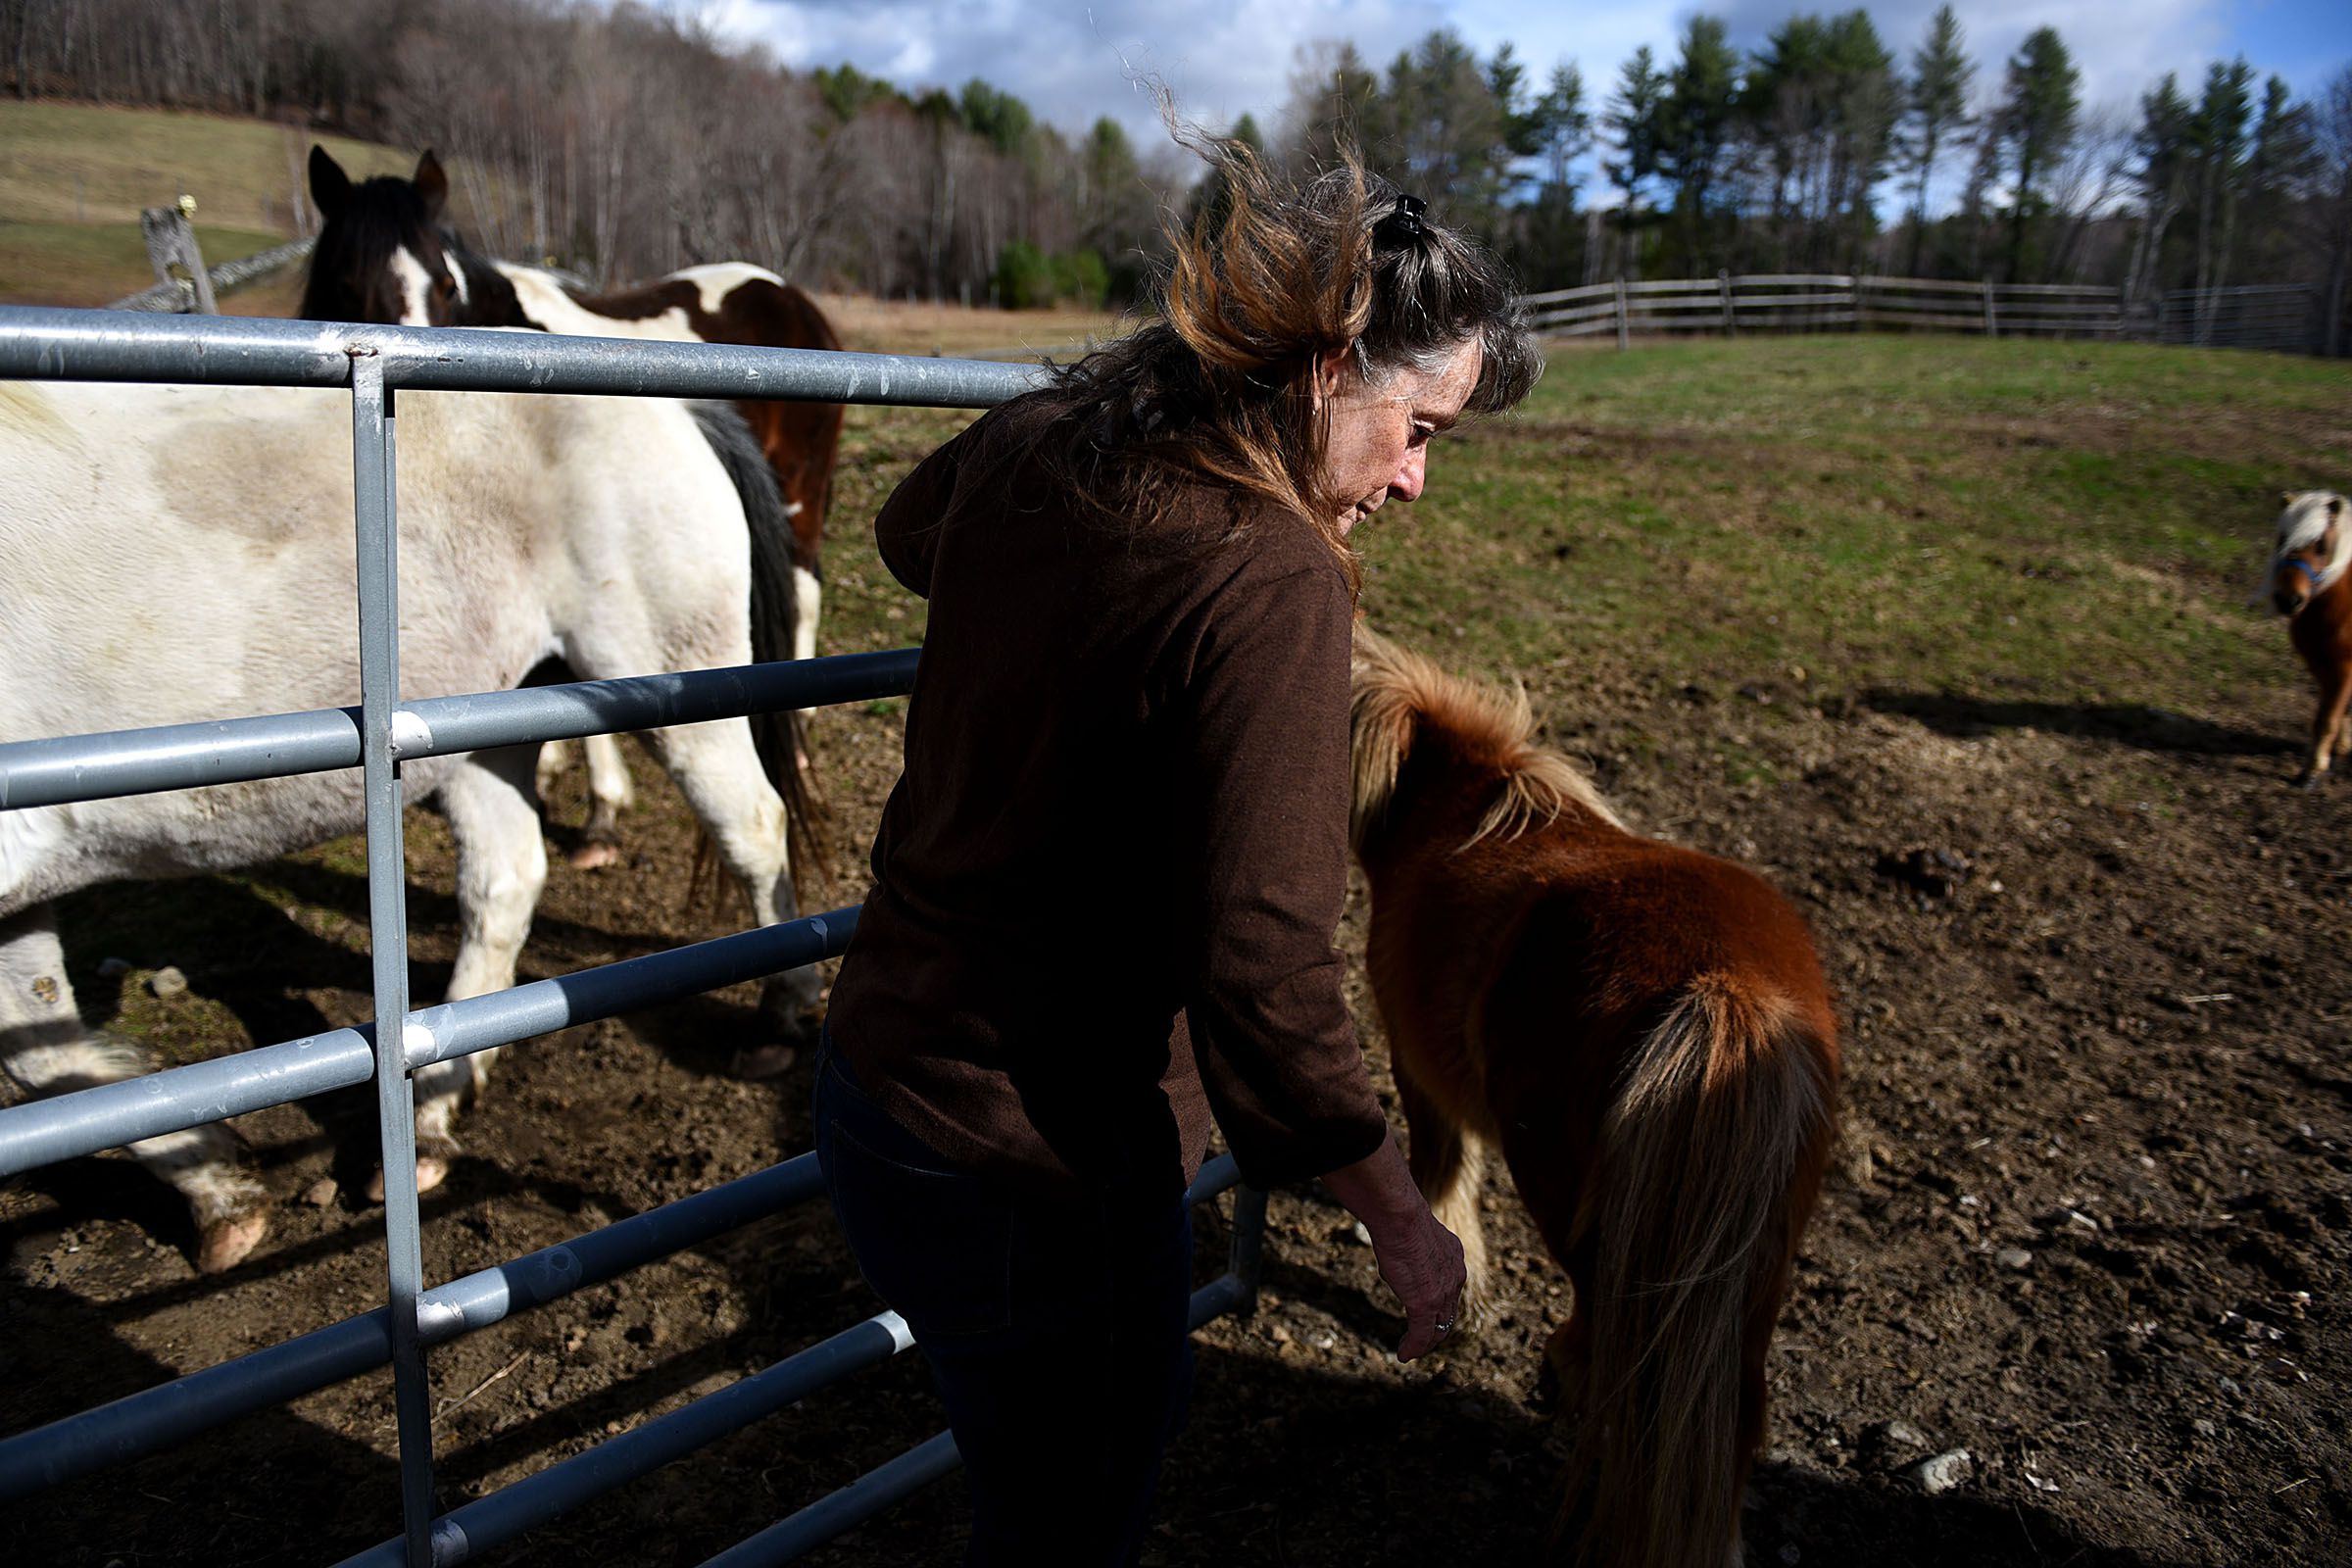 Kathy Williams, of Thetford, Vt., moves her horses to their daytime pasture on April 17, 2017. Williams and her husband, David, recieved a phone call from a person claiming to be calling from Dish Network asking for her credit card number. (Valley News - Jennifer Hauck) Copyright Valley News. May not be reprinted or used online without permission. Send requests to permission@vnews.com.